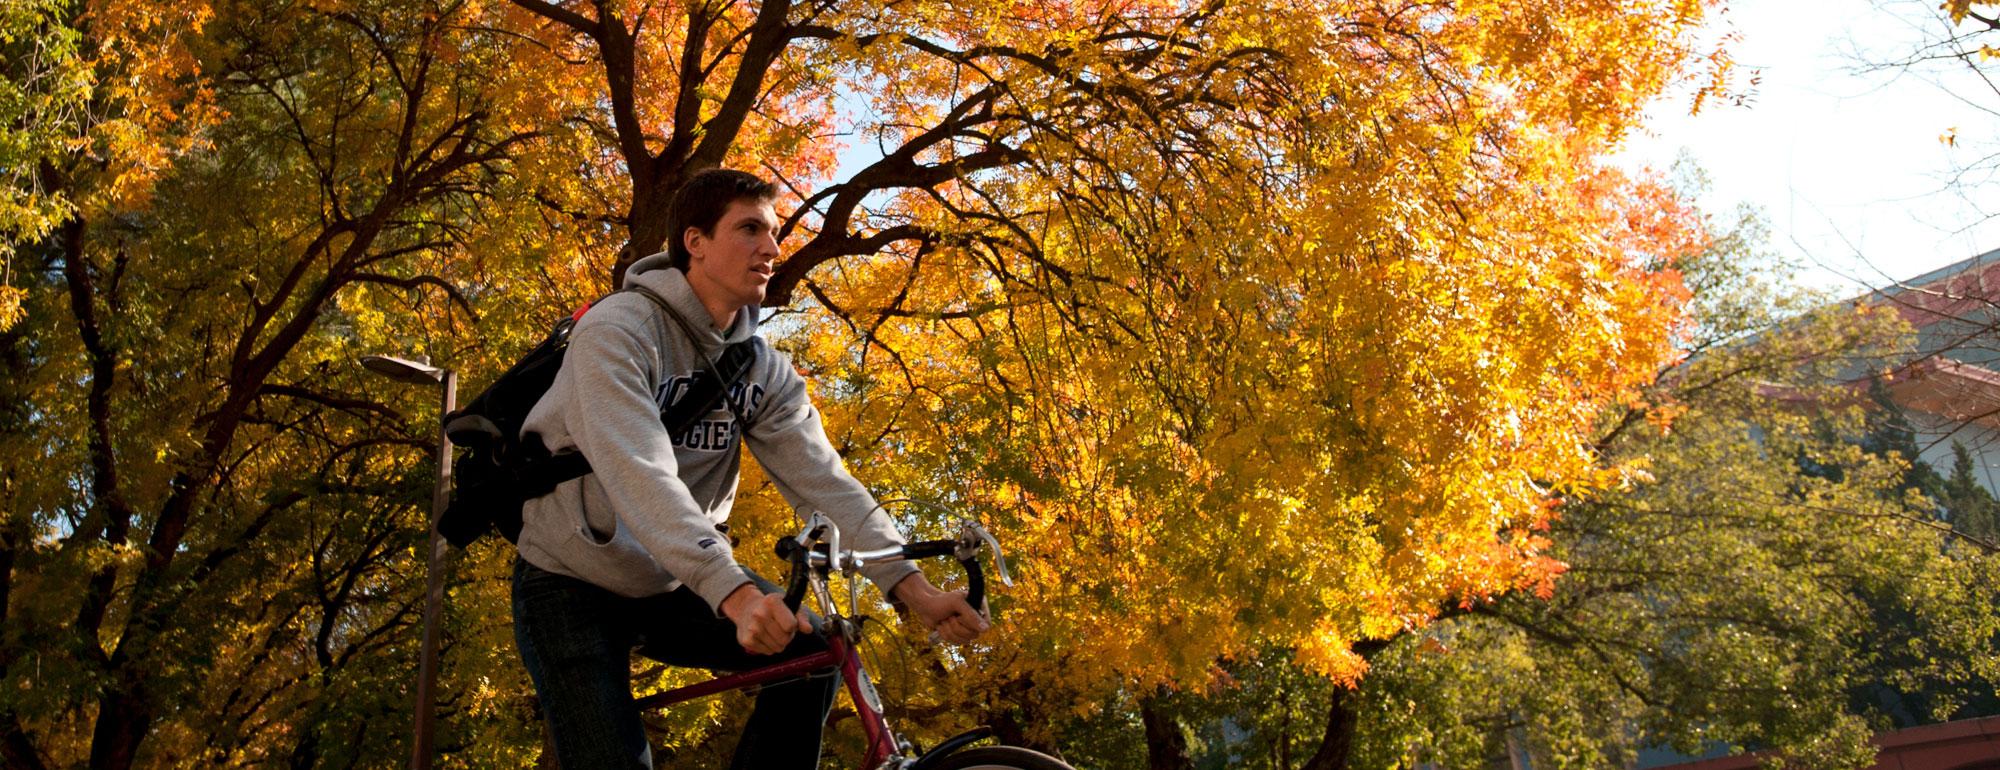 A male student rides his bicycle under the Fall foliage on the UC Davis campus